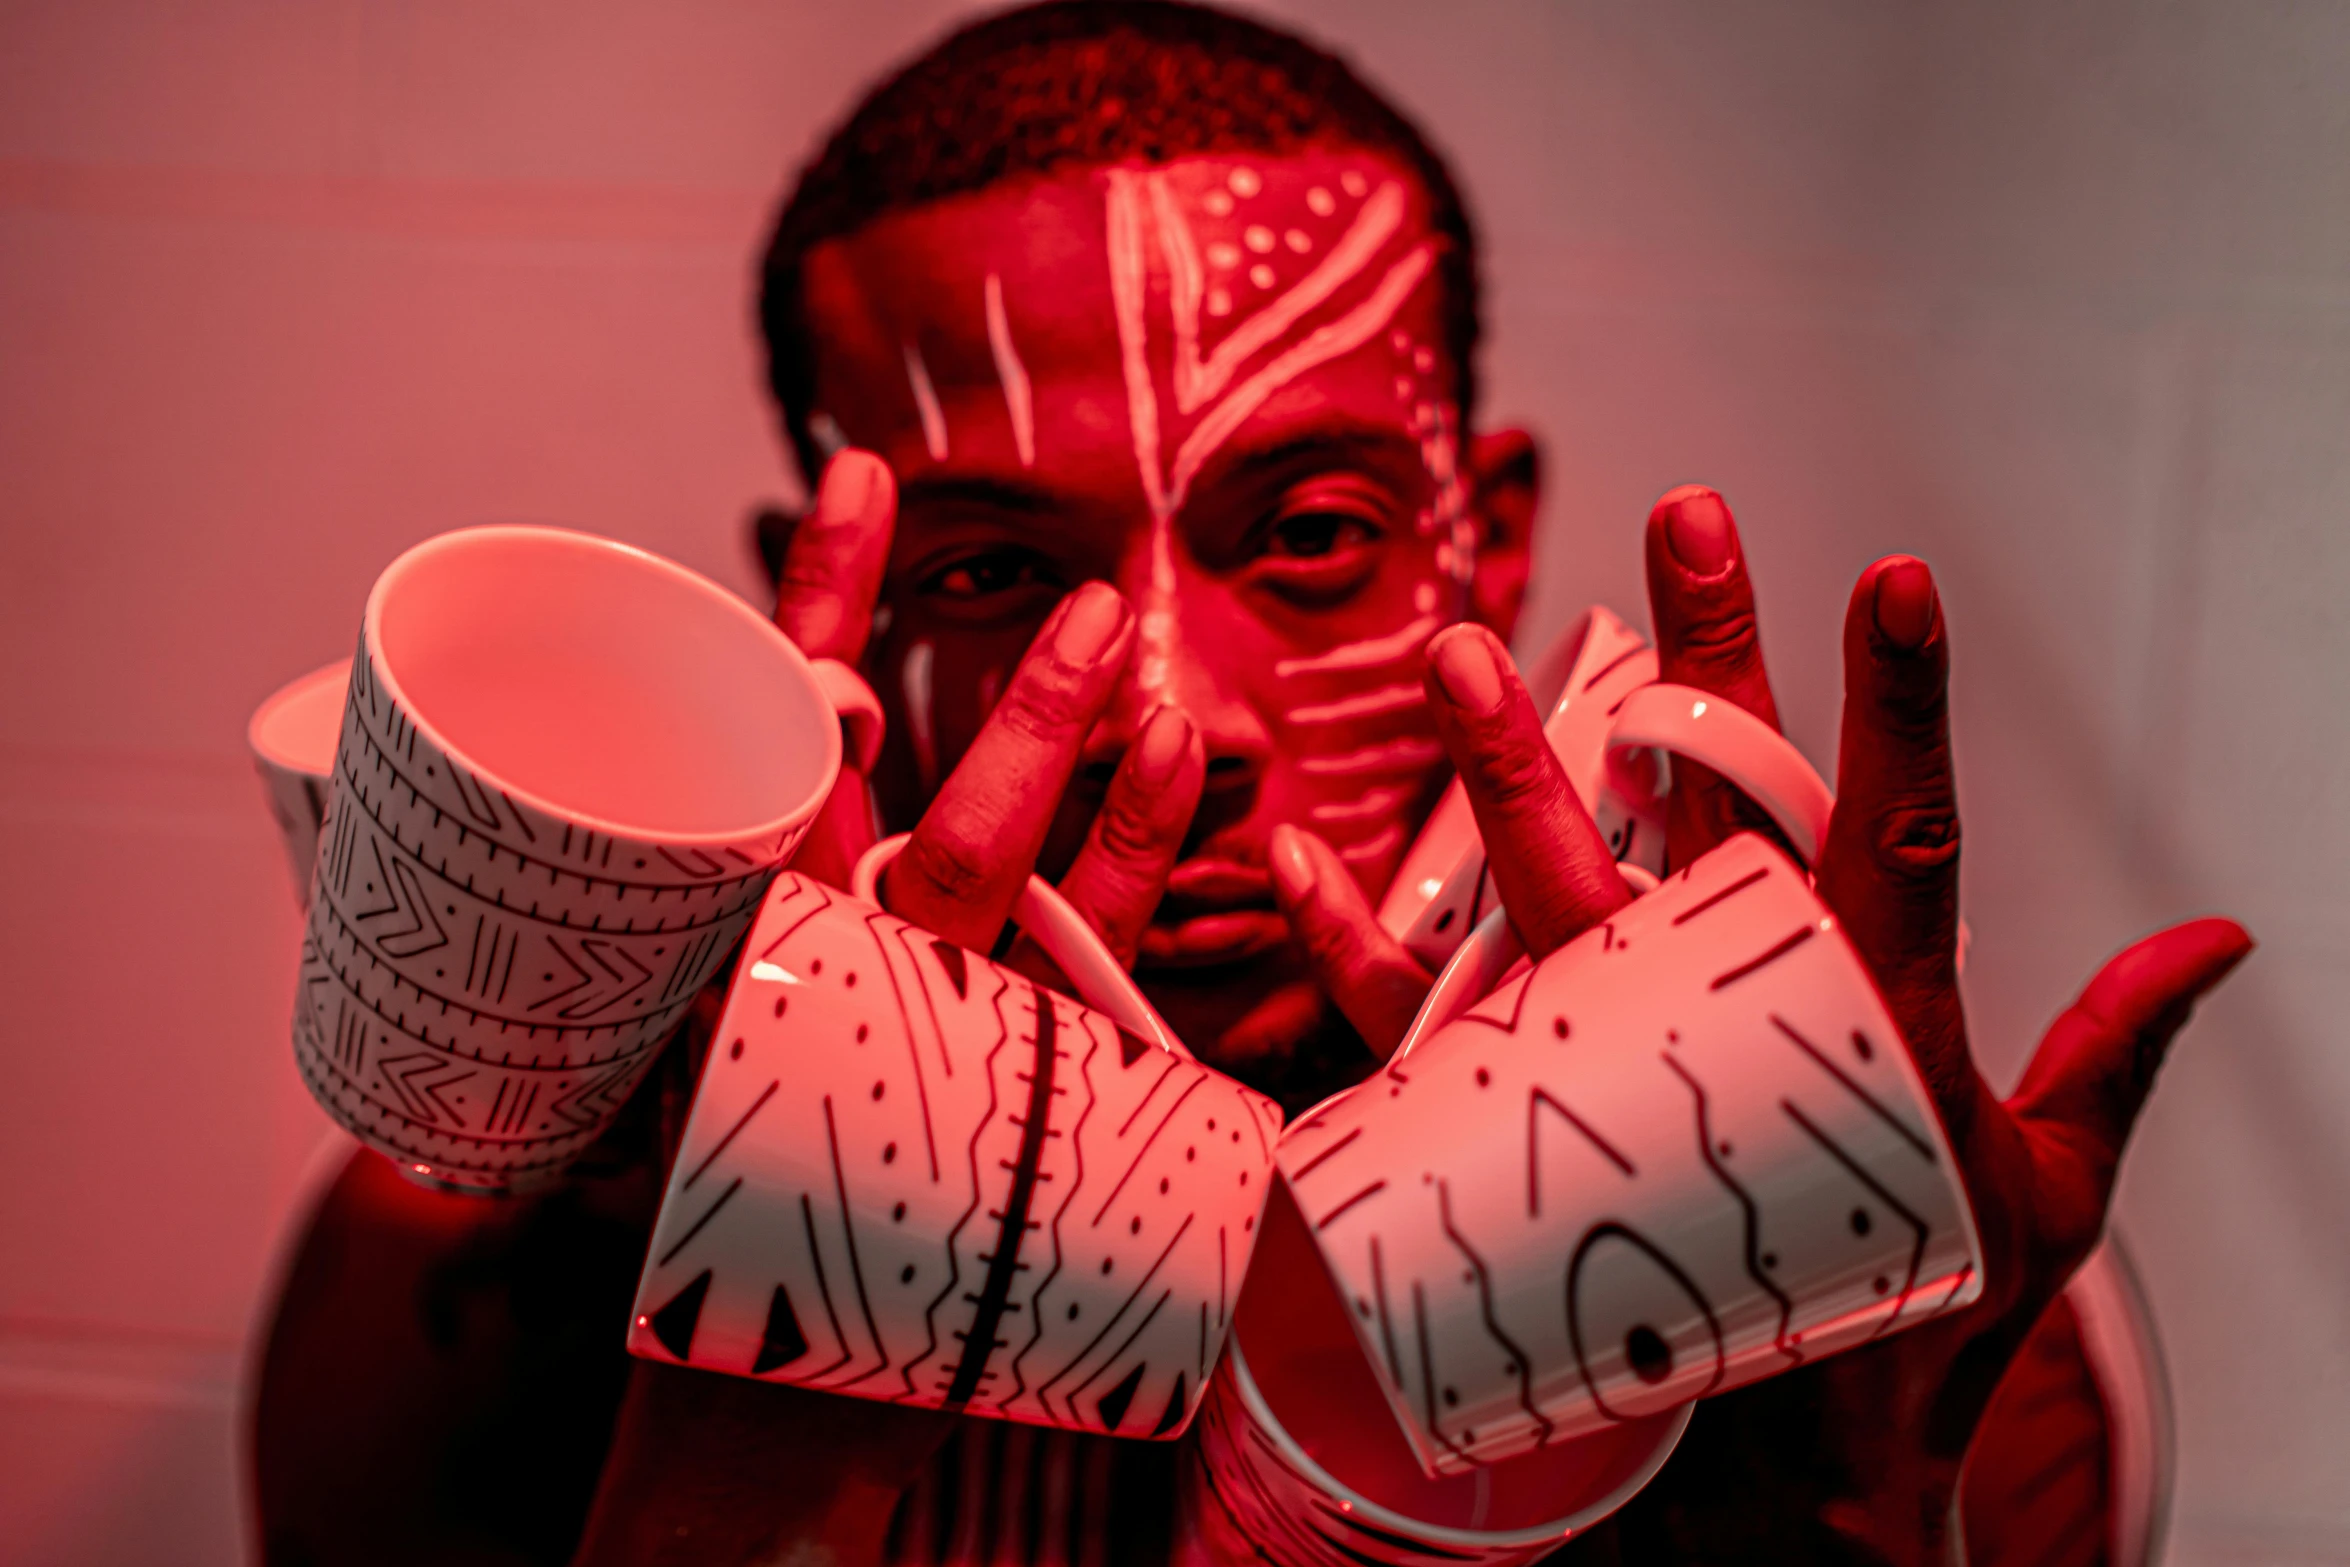 a man with red paint on his face holding a cup, an album cover, inspired by Afewerk Tekle, pexels contest winner, afrofuturism, with a white mug, patterned, underlit, coffee cups